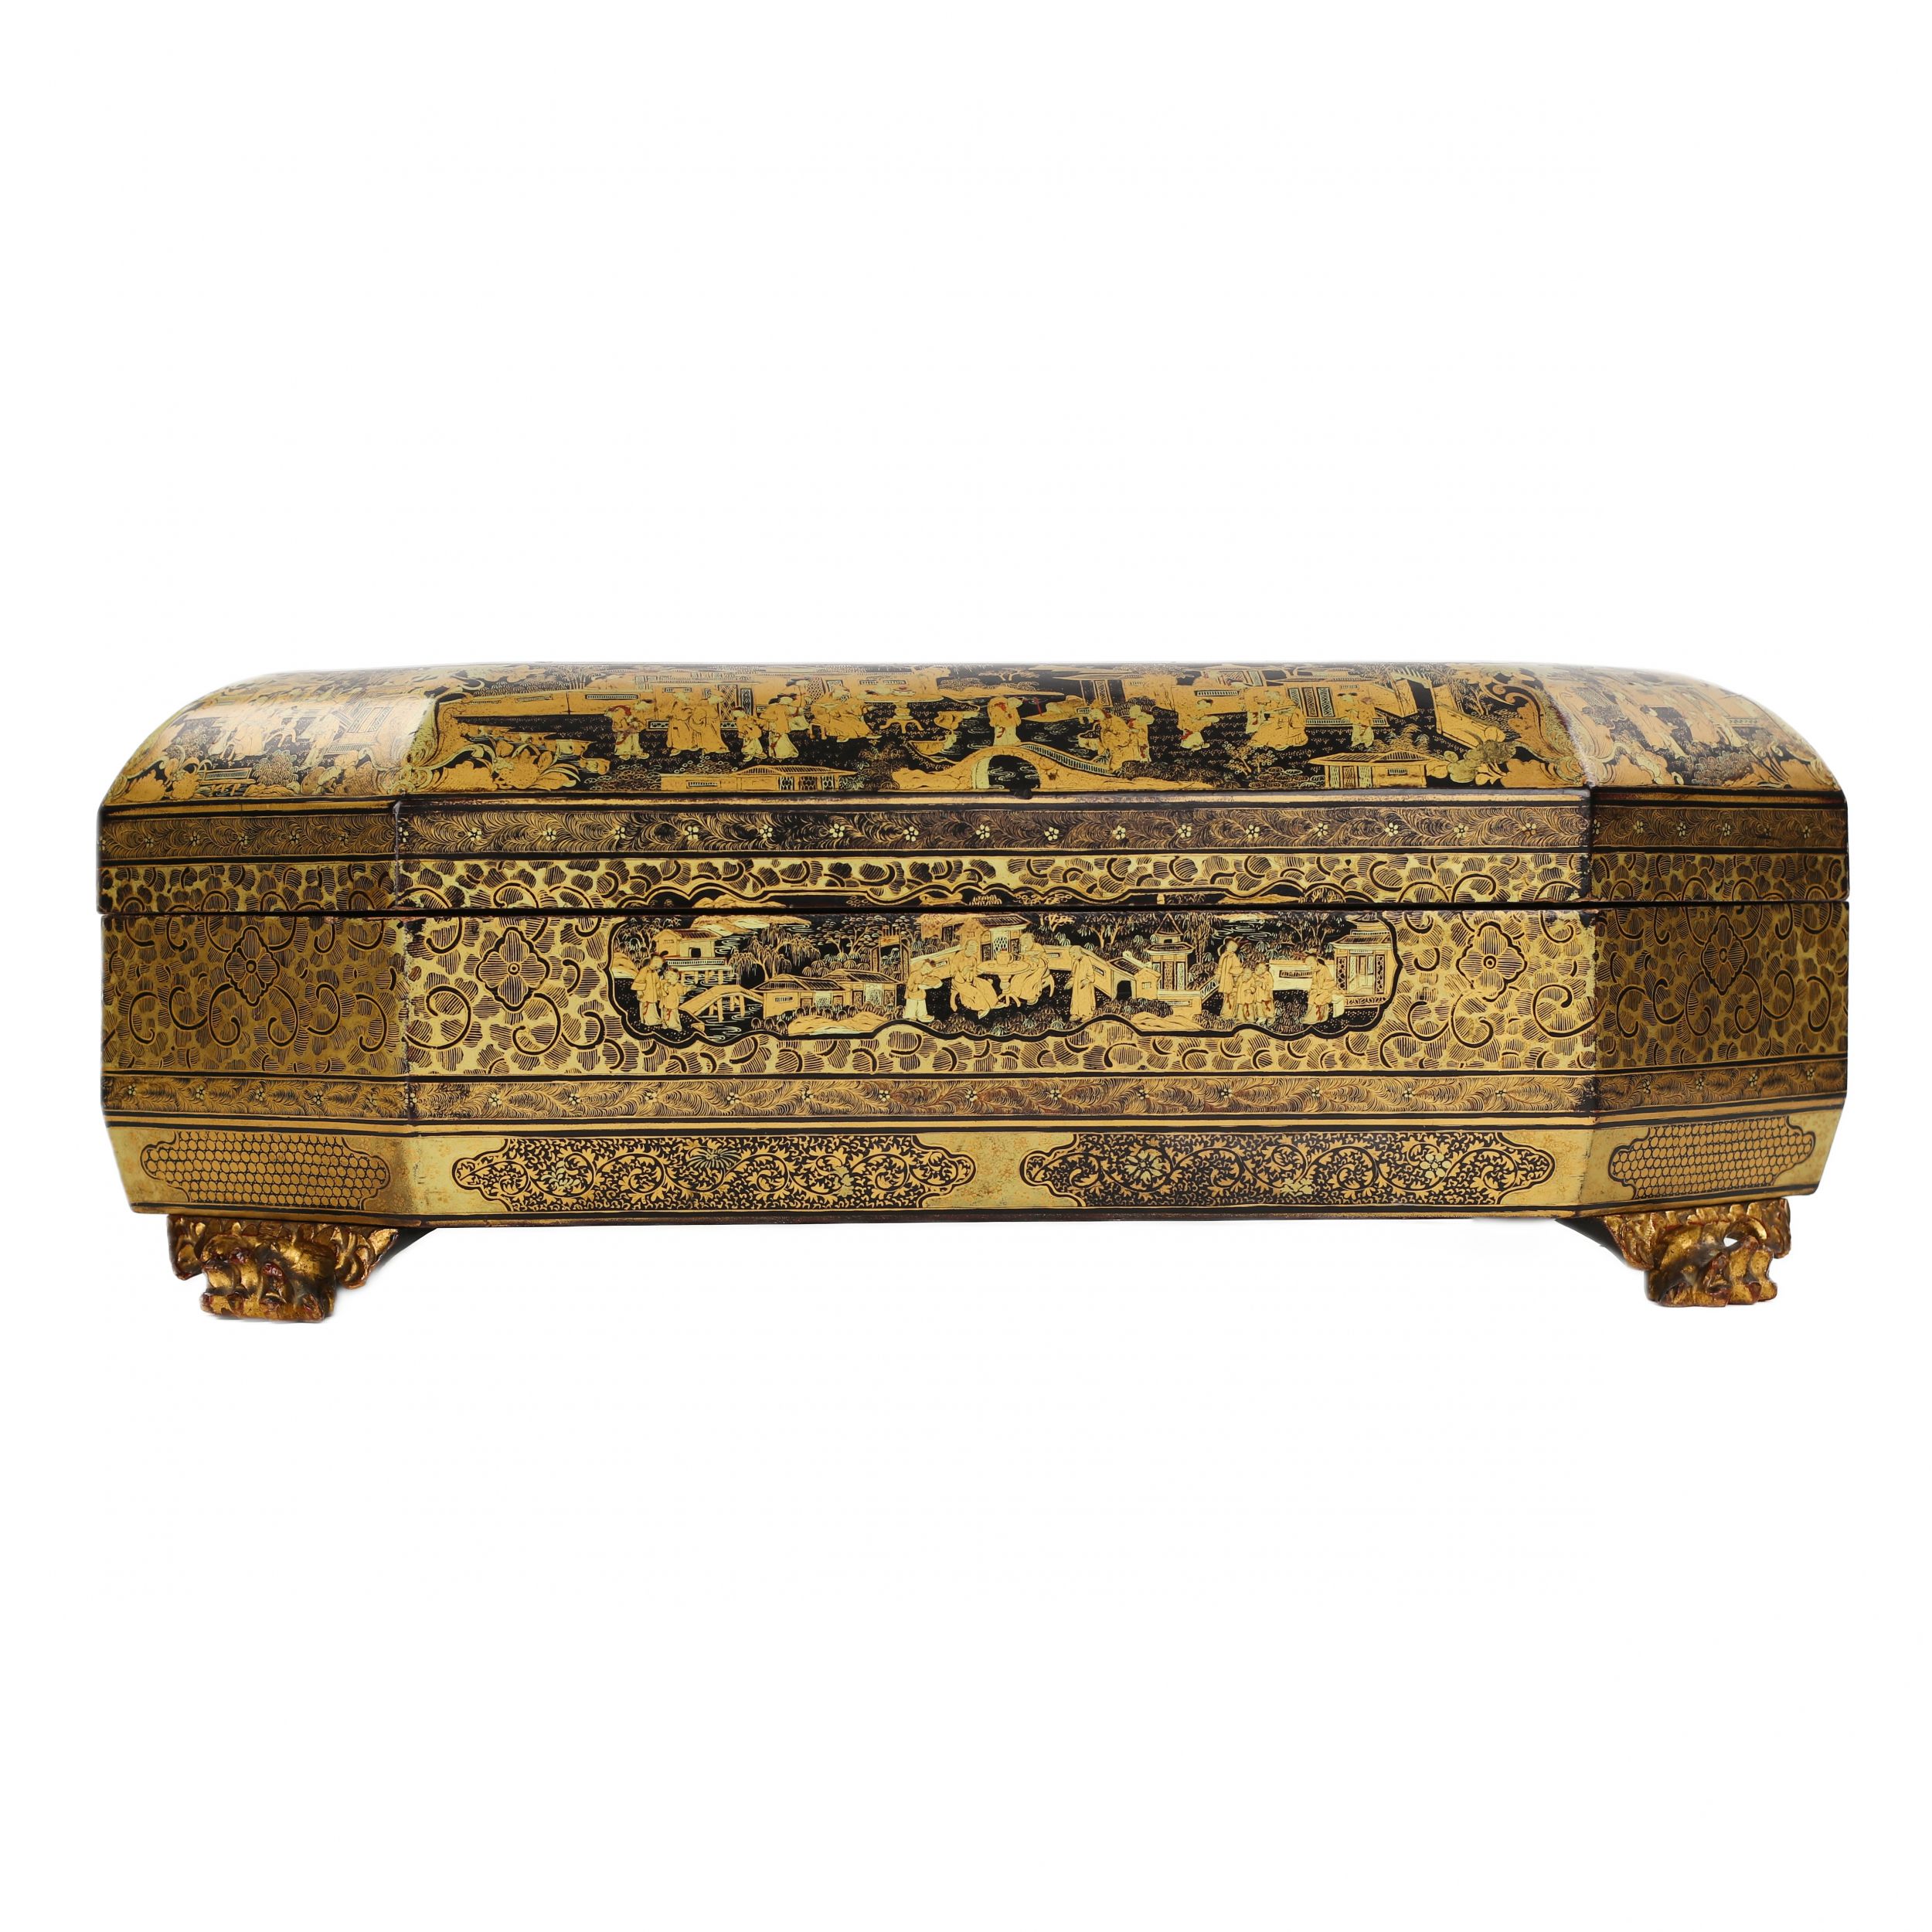 Wooden lacquered box for board and card games. China 19th century. - Image 8 of 8